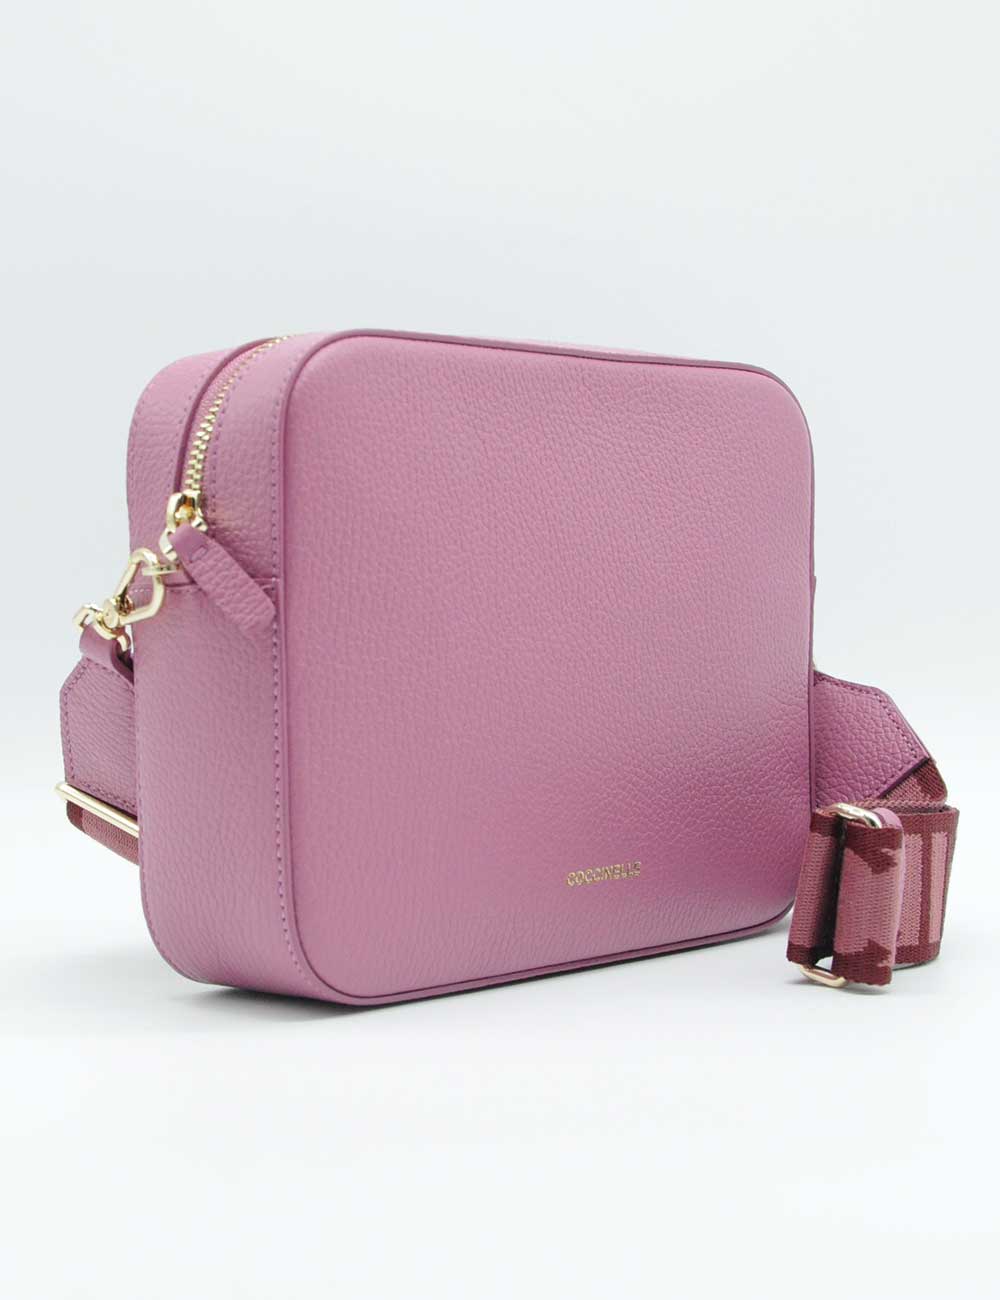 Coccinelle Camera Bag Tebe Pulp Pink